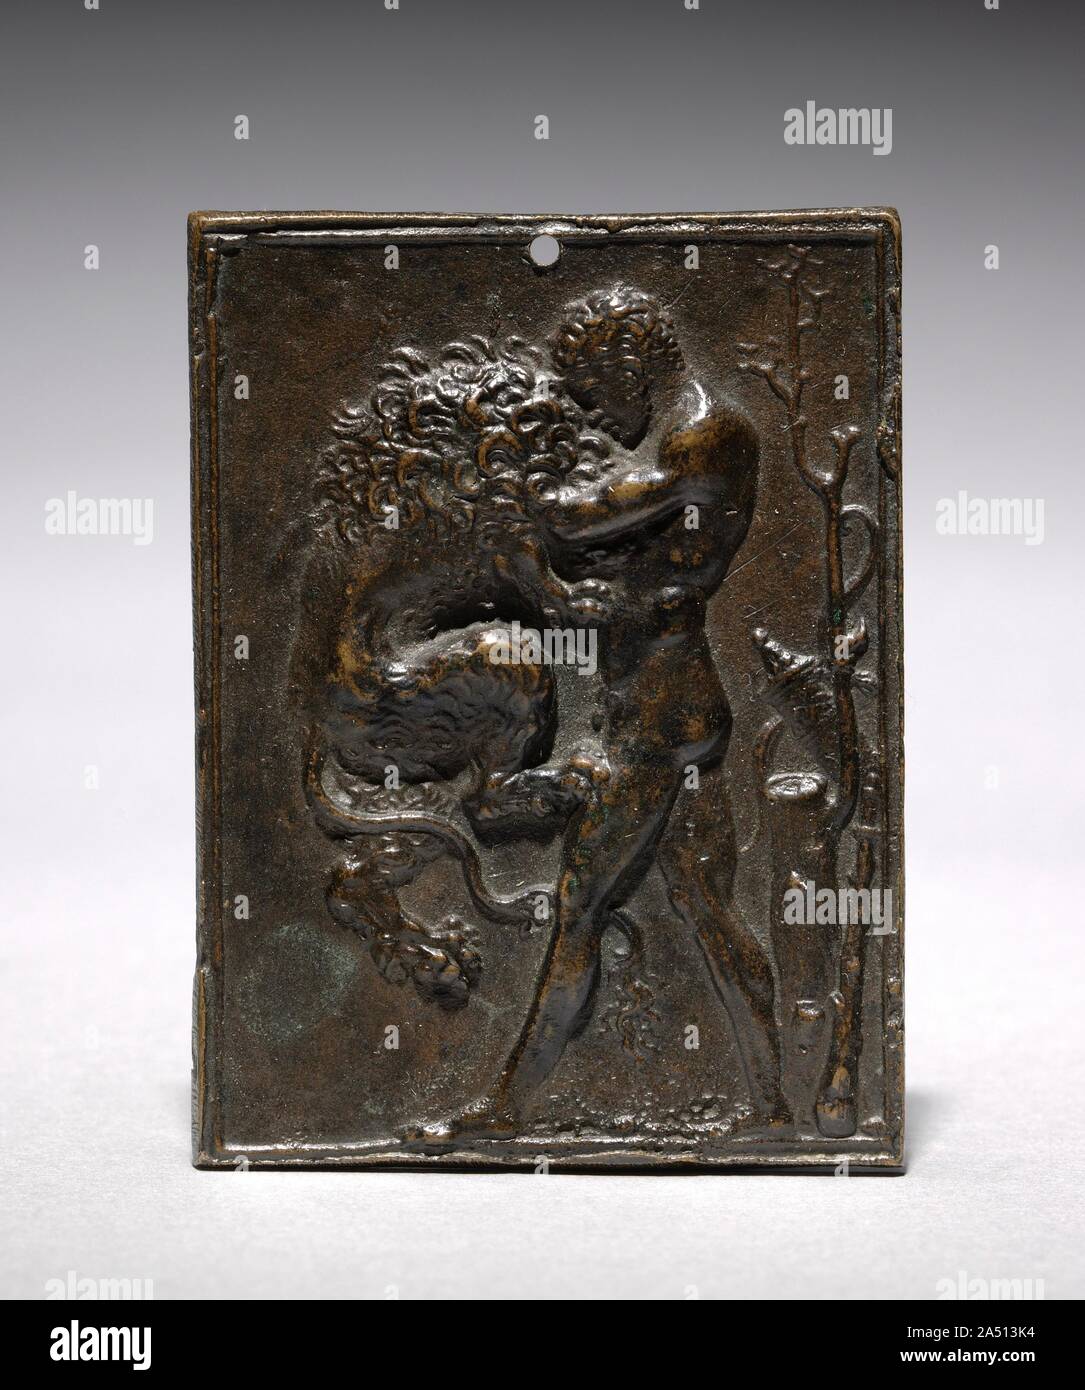 Hercules And The Nemean Lion 16th Century Whereas The Ancient Sculpture Of Hercules Nearby May Have Served As A Sacred Offering This Renaissance Plaquette And Statue Were Collected And Appreciated For The